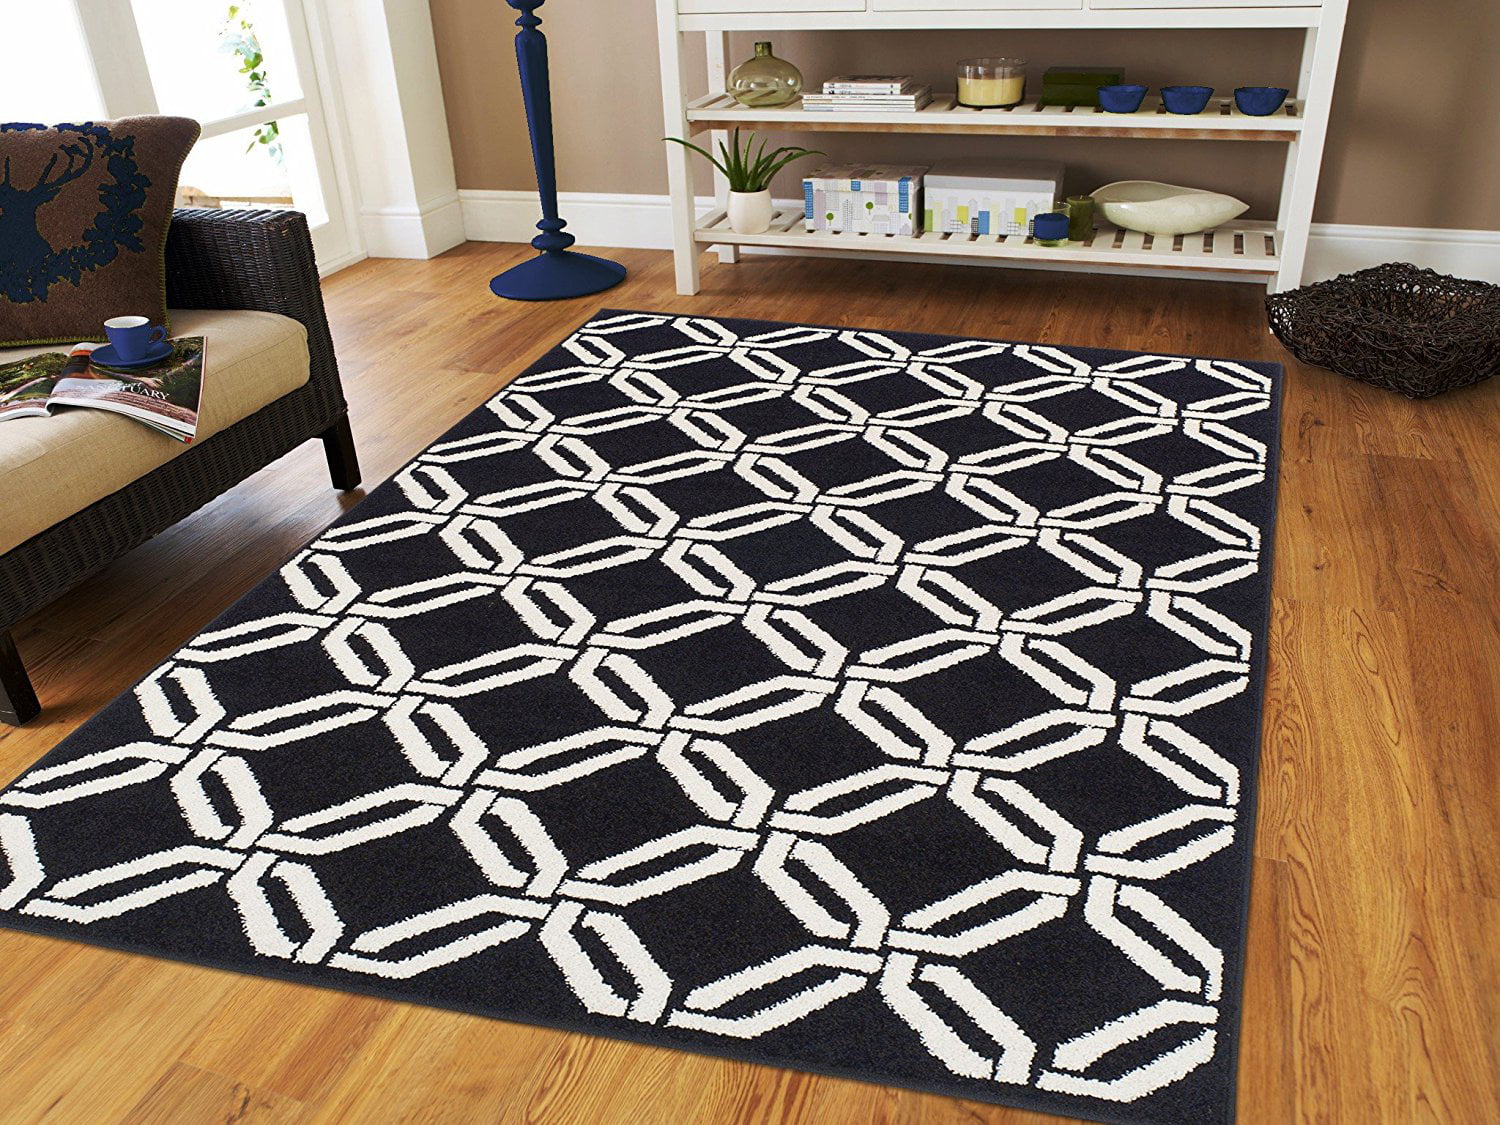 5x7 rug for living room